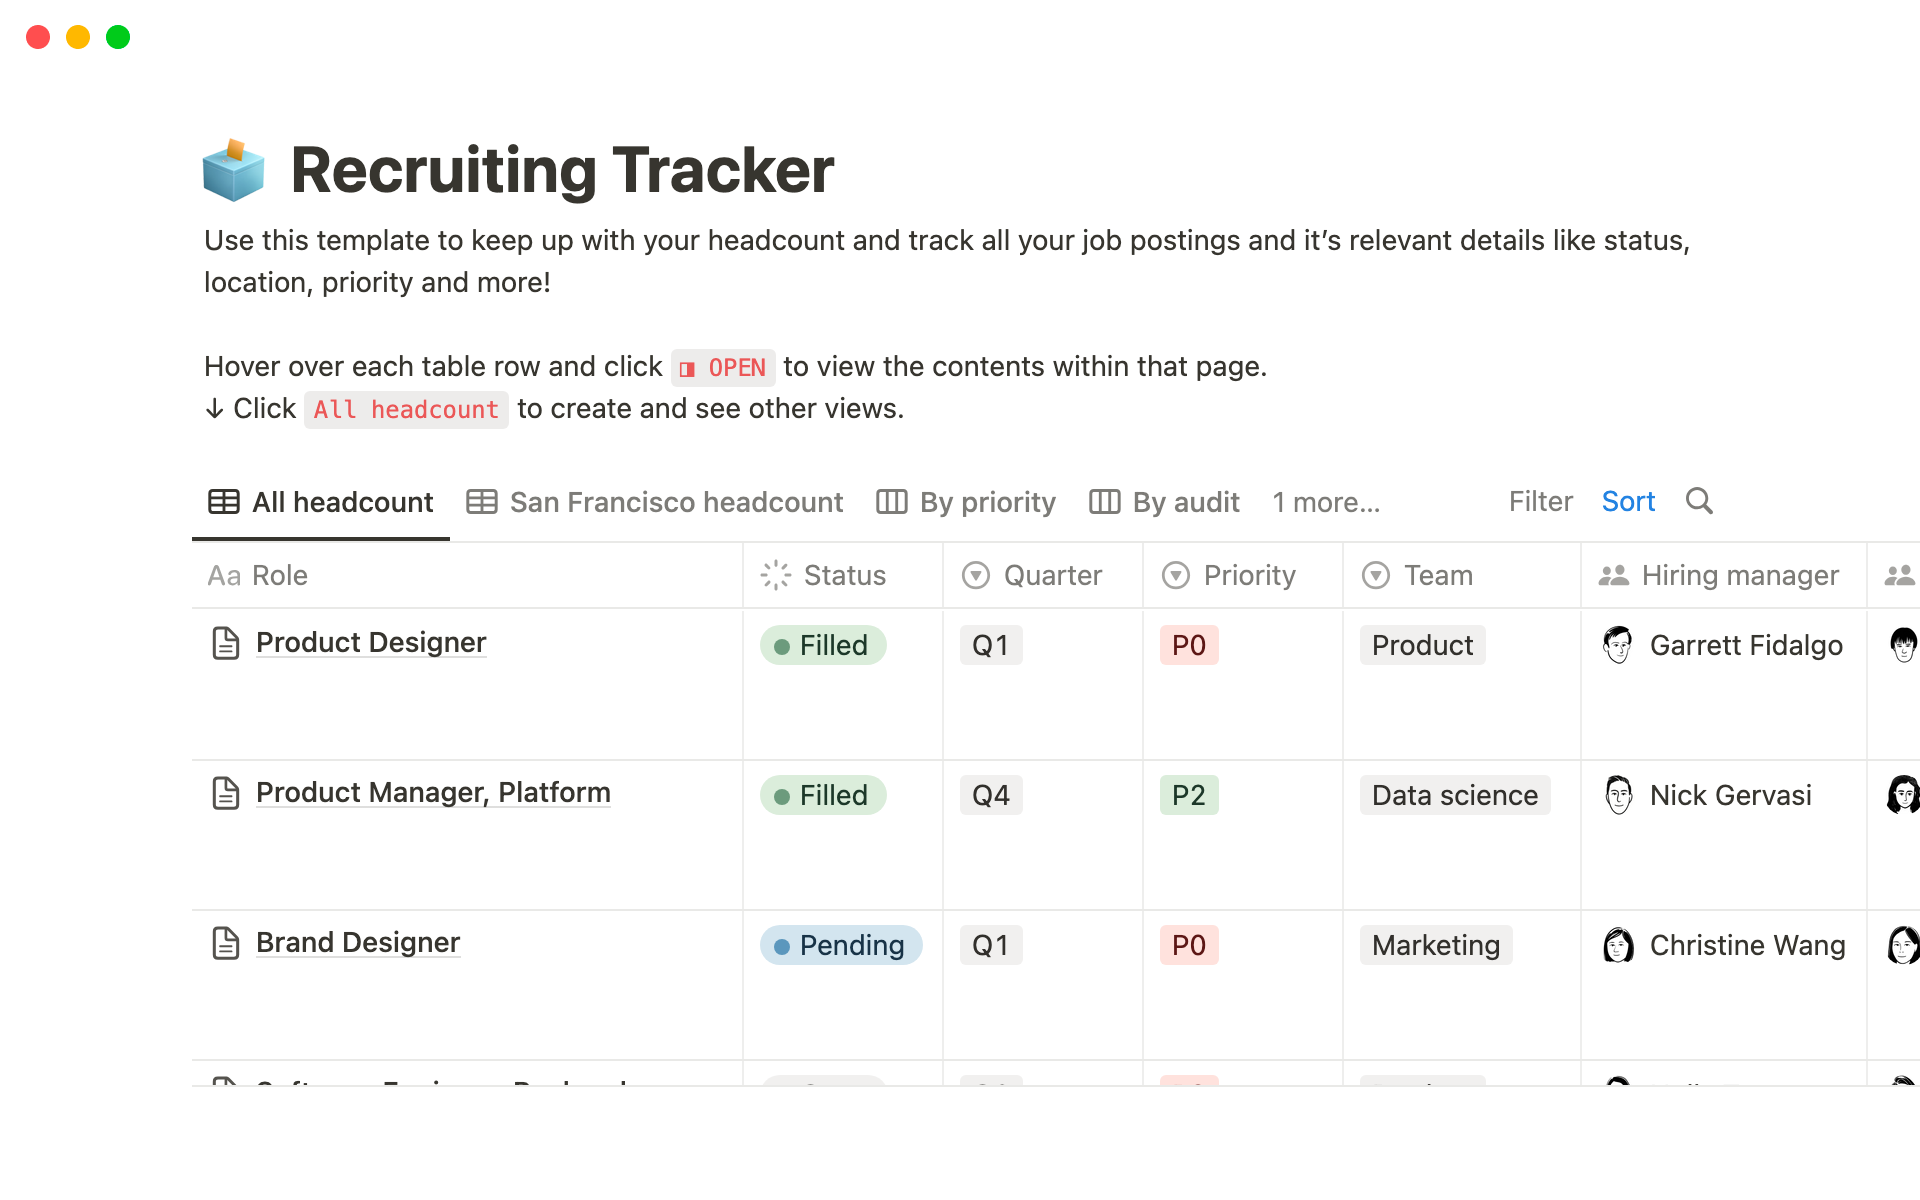 This template makes it easy for your company to keep up with your headcount, including job postings and relevant details like role, status, location, and more.